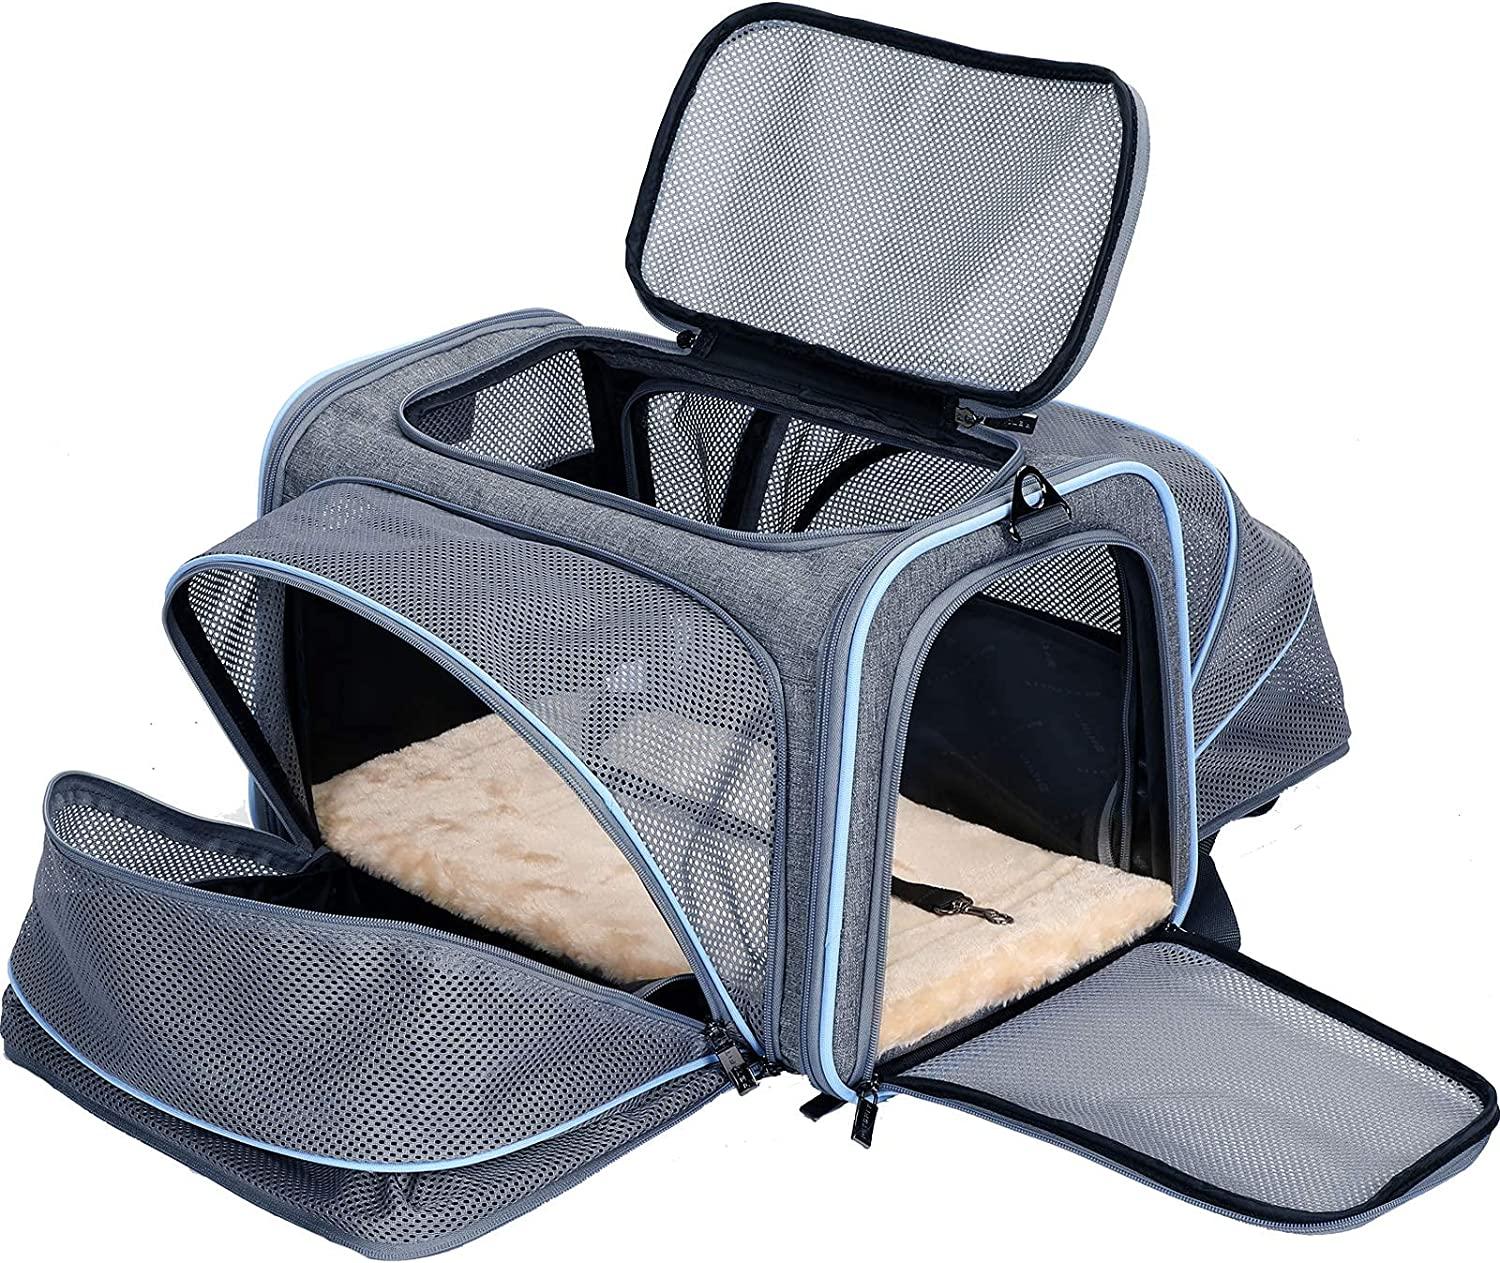 Extra Large Cat Carrier Soft Sided Folding Small Medium Dog Pet Carrier  24x16.5x16 Travel Collapsible Ventilated Comfortable 